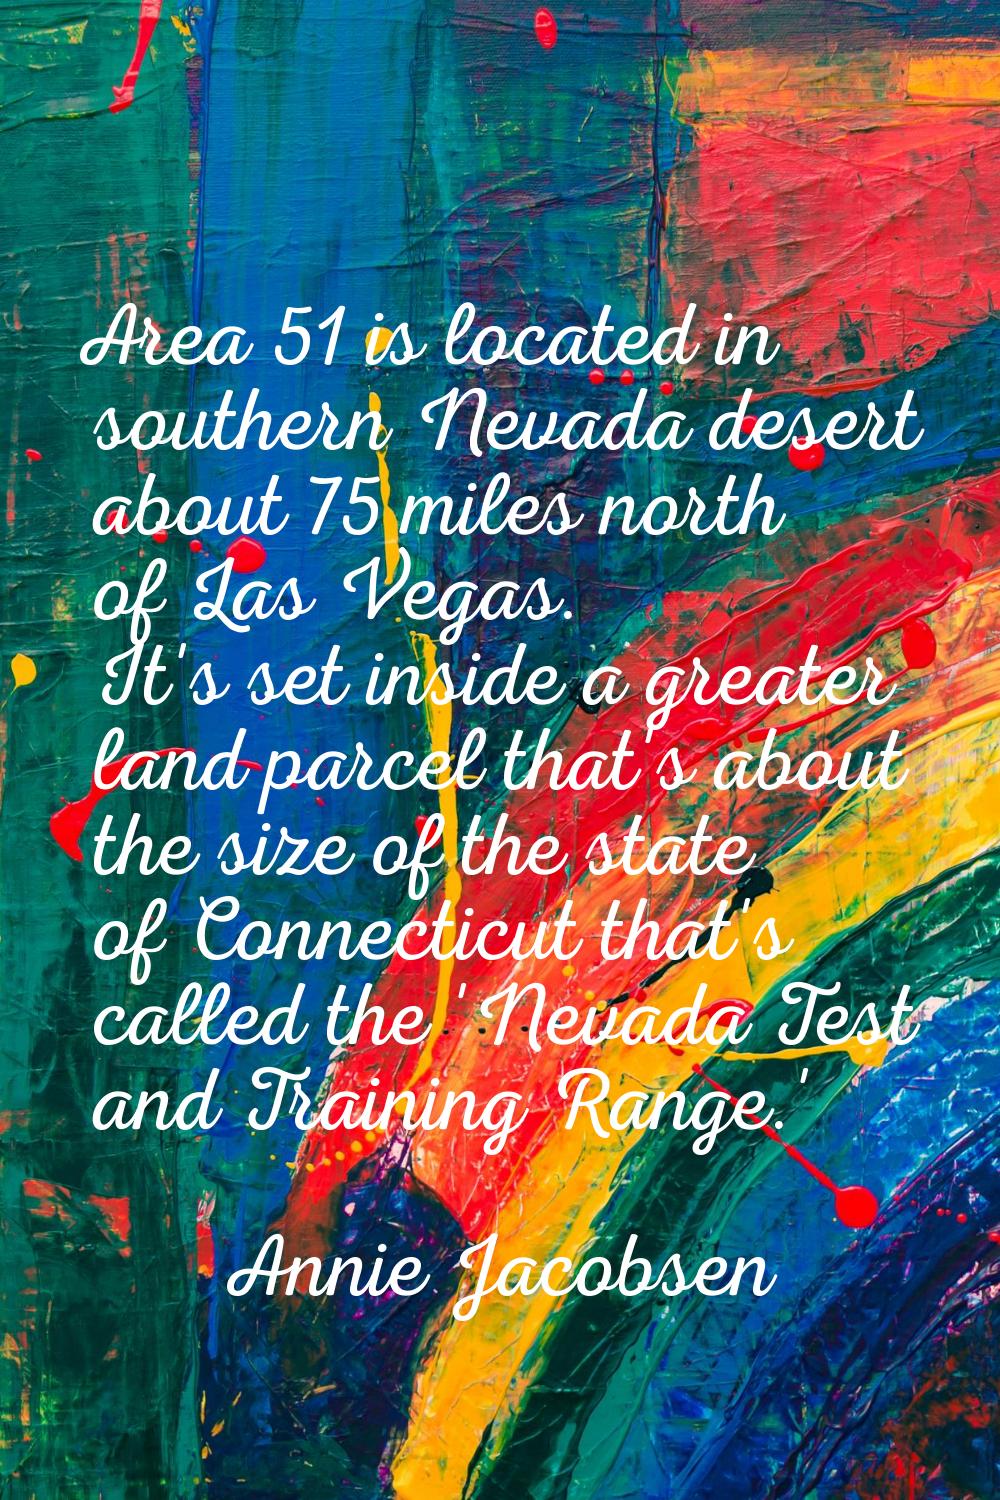 Area 51 is located in southern Nevada desert about 75 miles north of Las Vegas. It's set inside a g